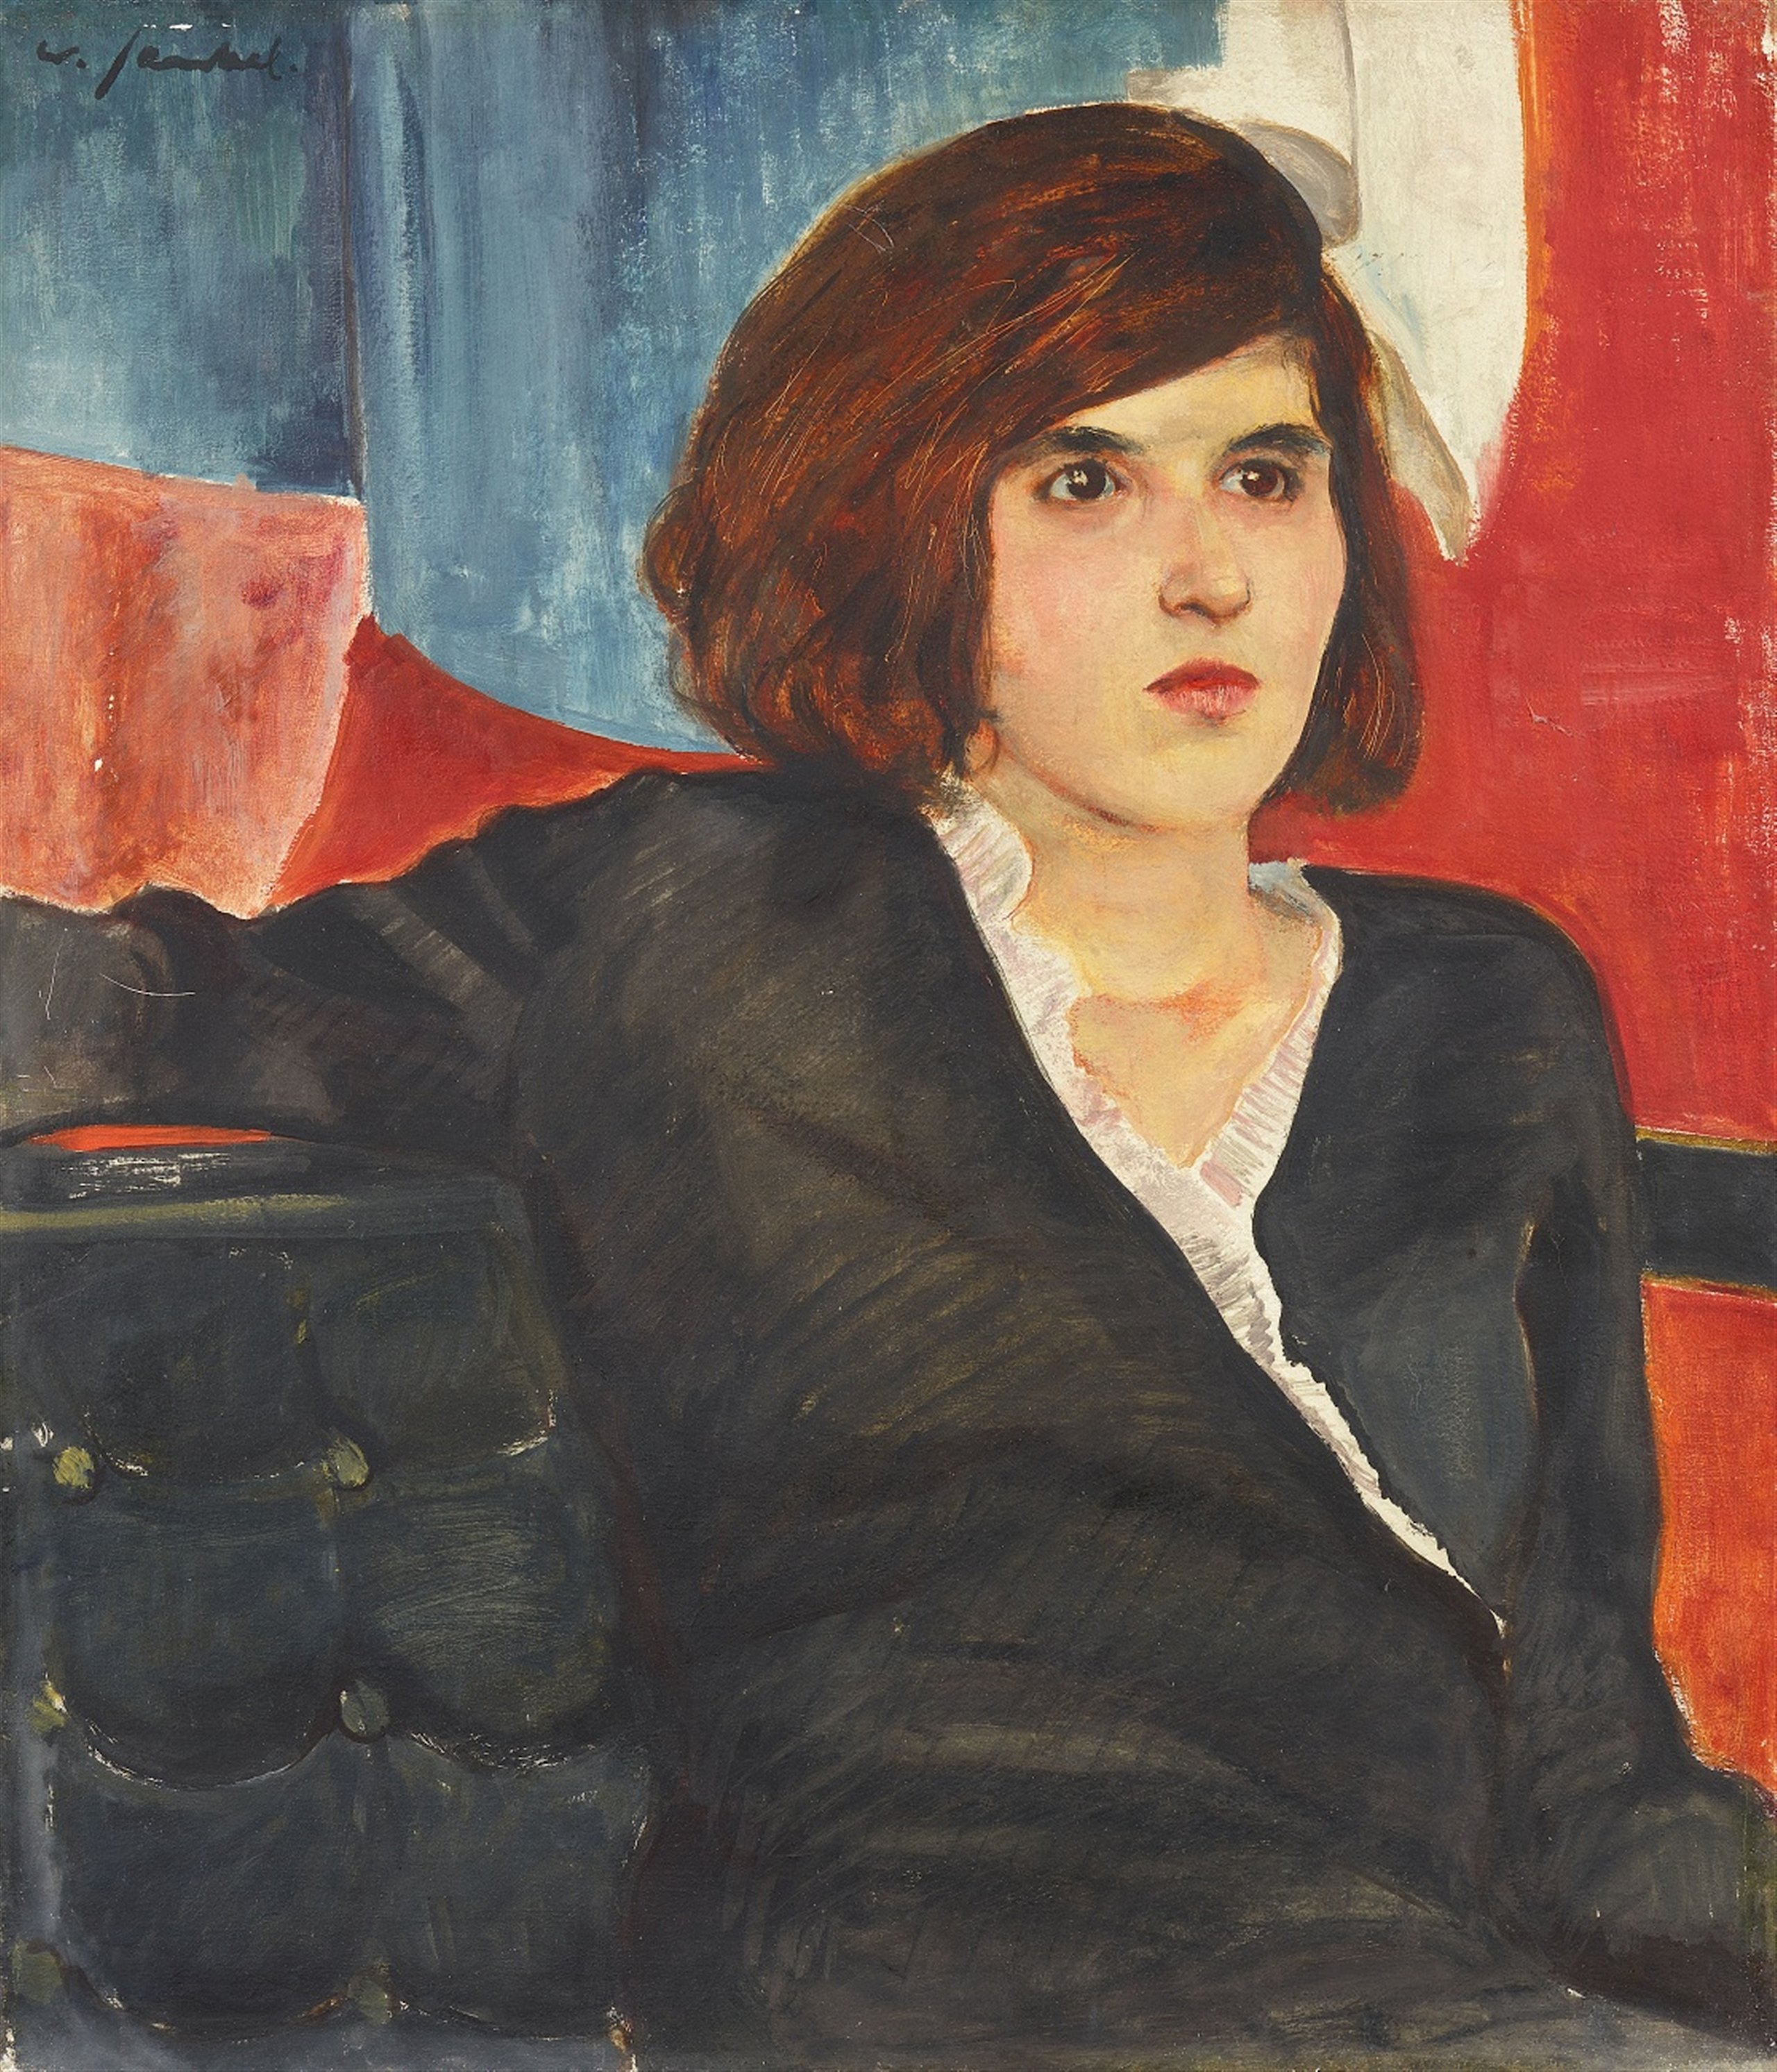 Young Woman on Barcelona Chair by Willy Jaeckel - ca. 1930 - 70.5 x 60.5 cm private collection